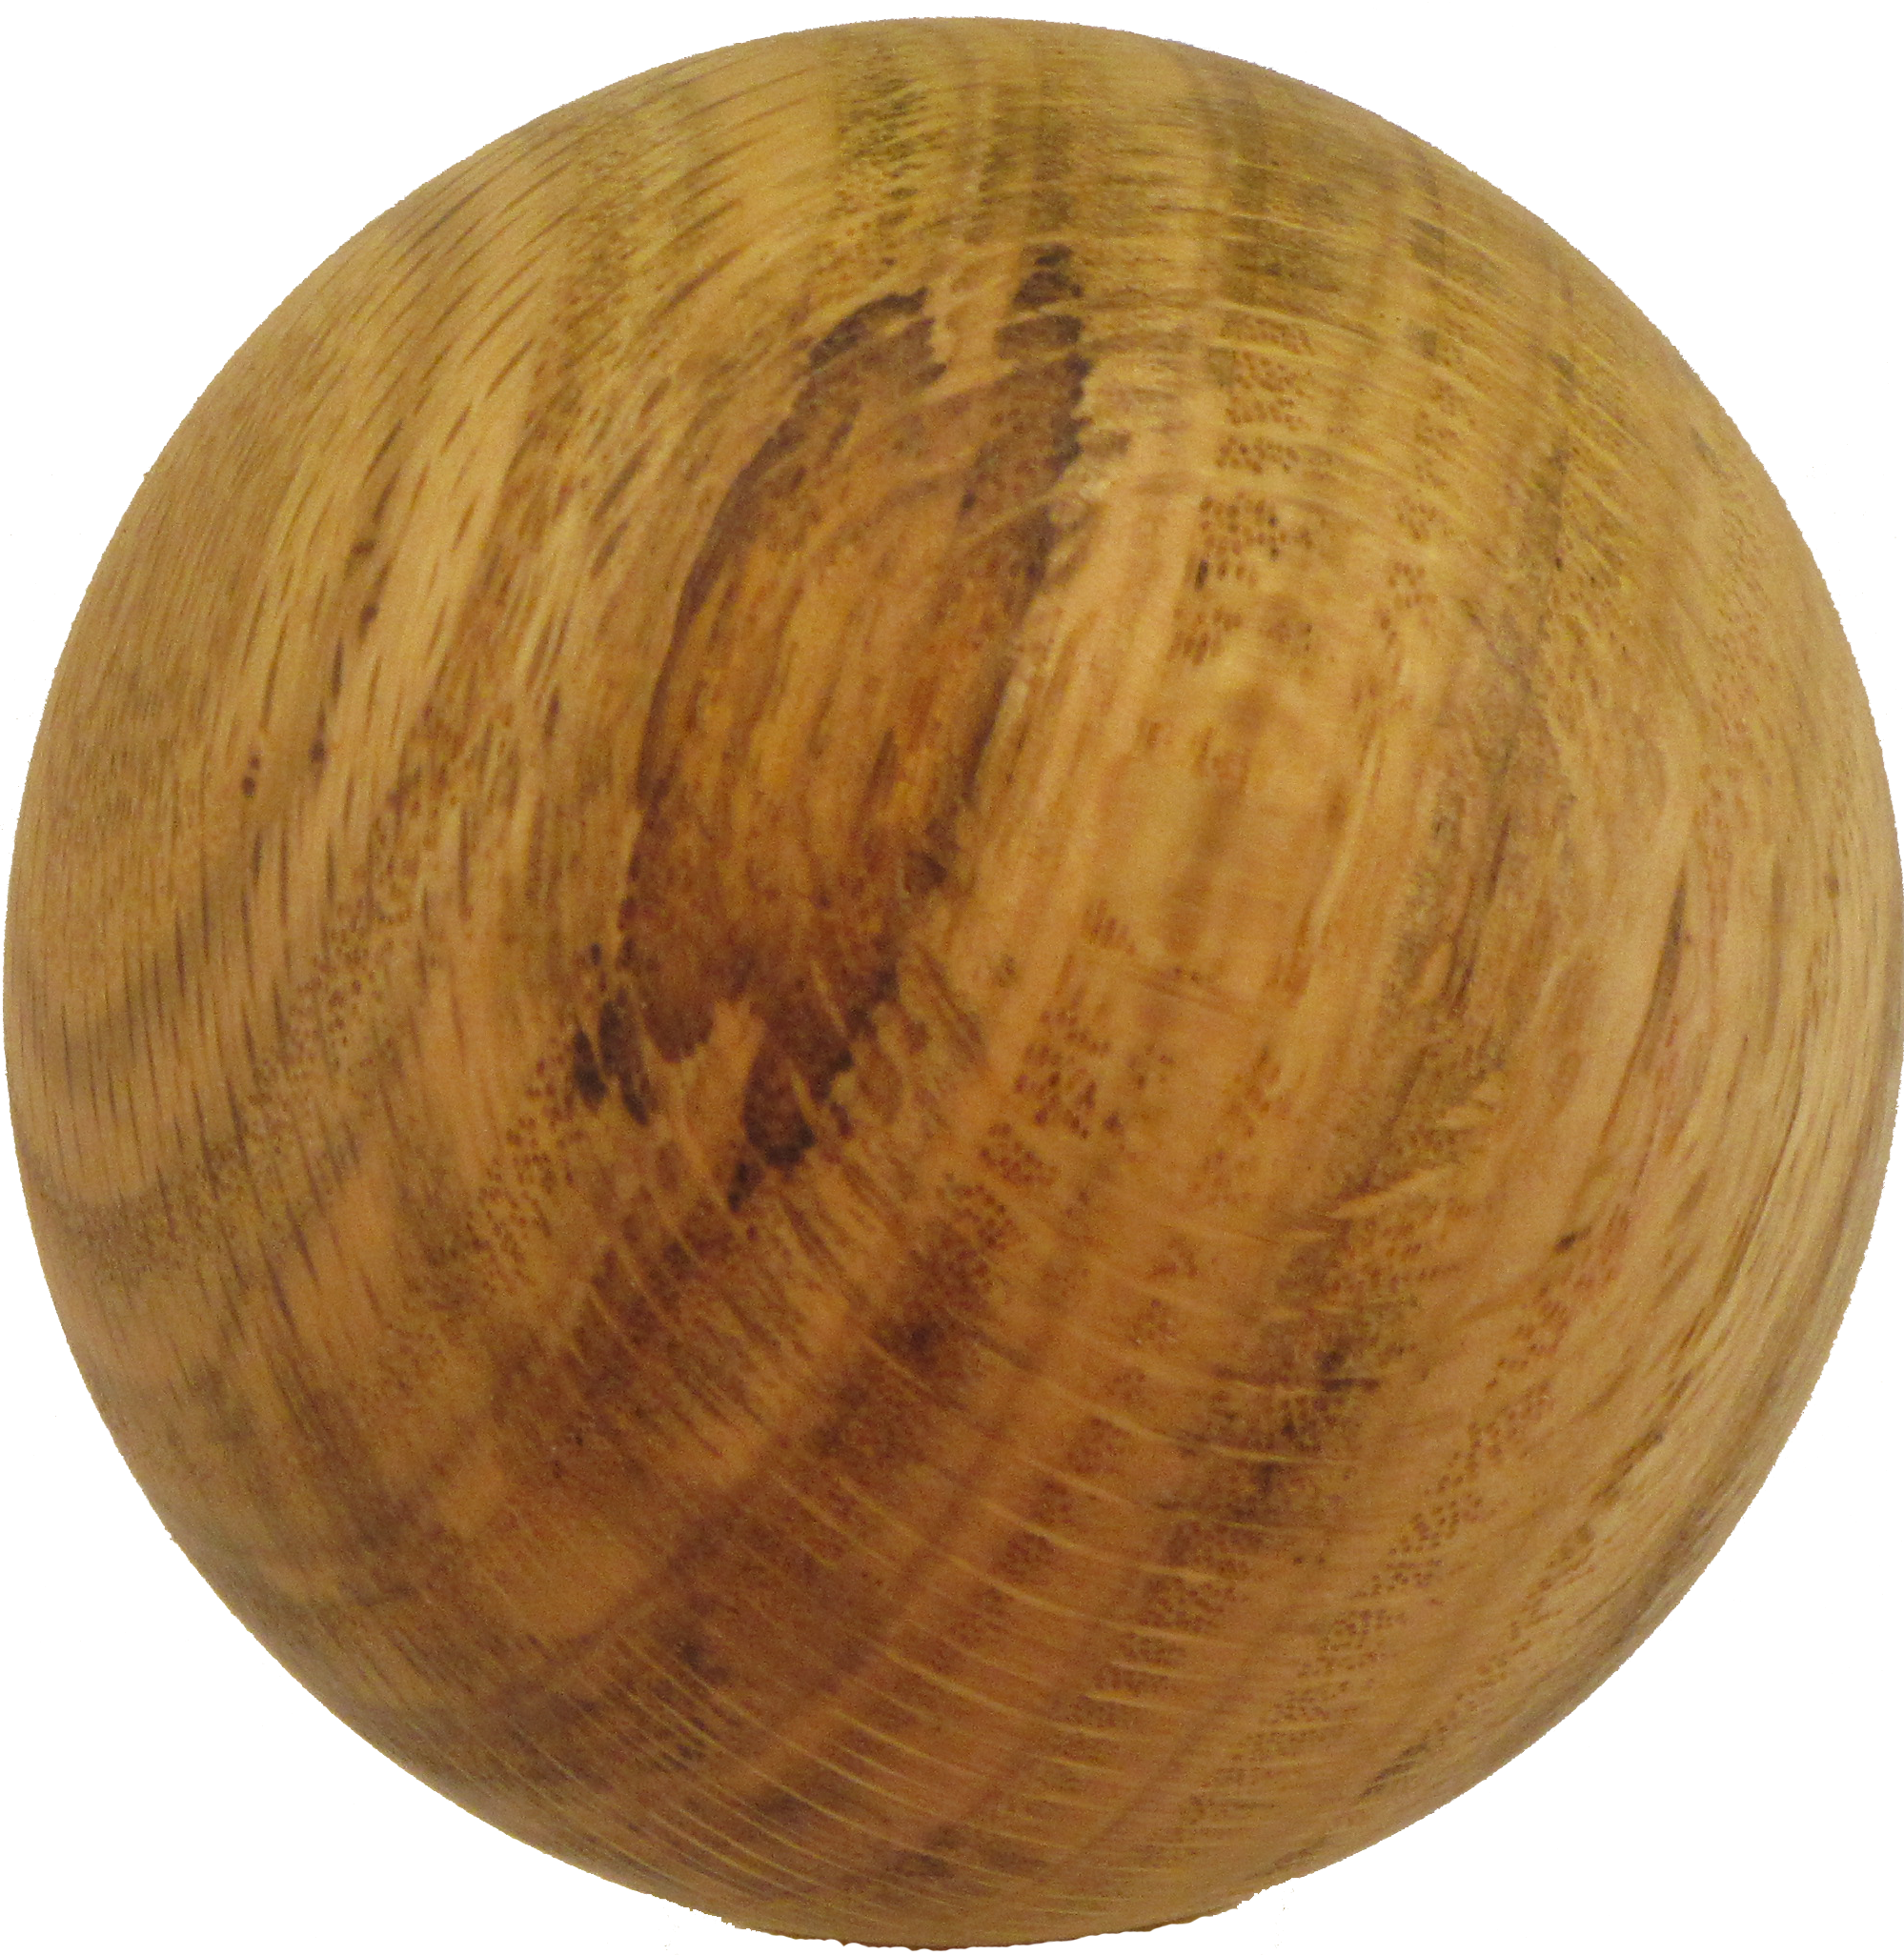 Turn A Perfect Wood Sphere Or Ball – No Expensive Jig